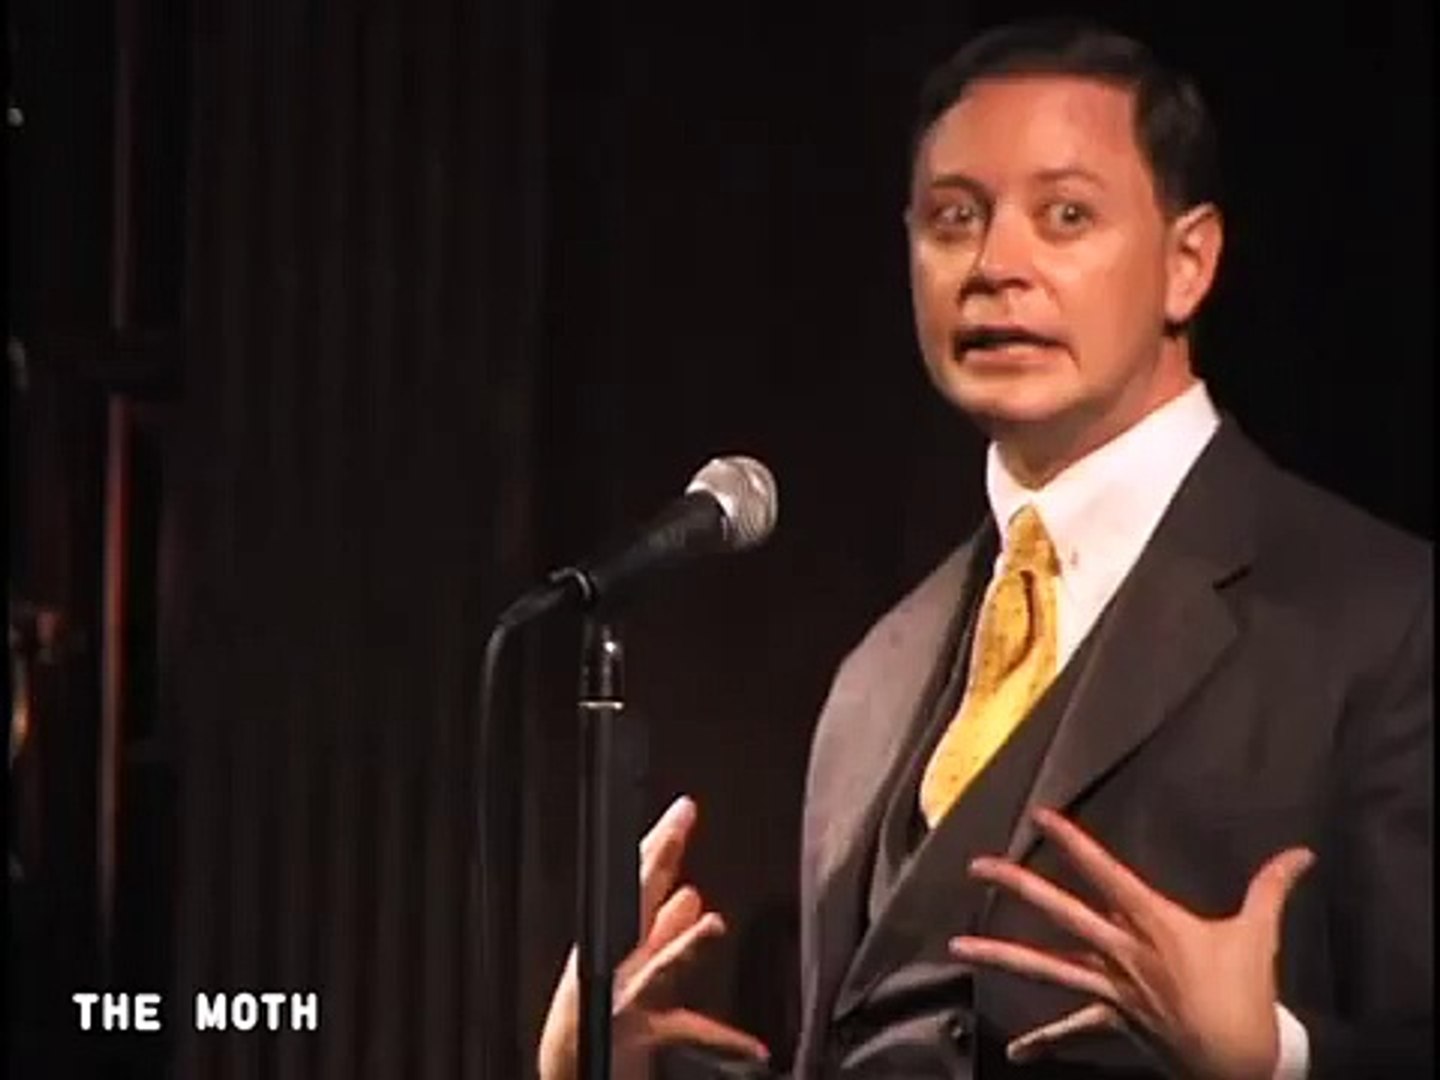 The Moth Presents Andrew Solomon: The Refugees